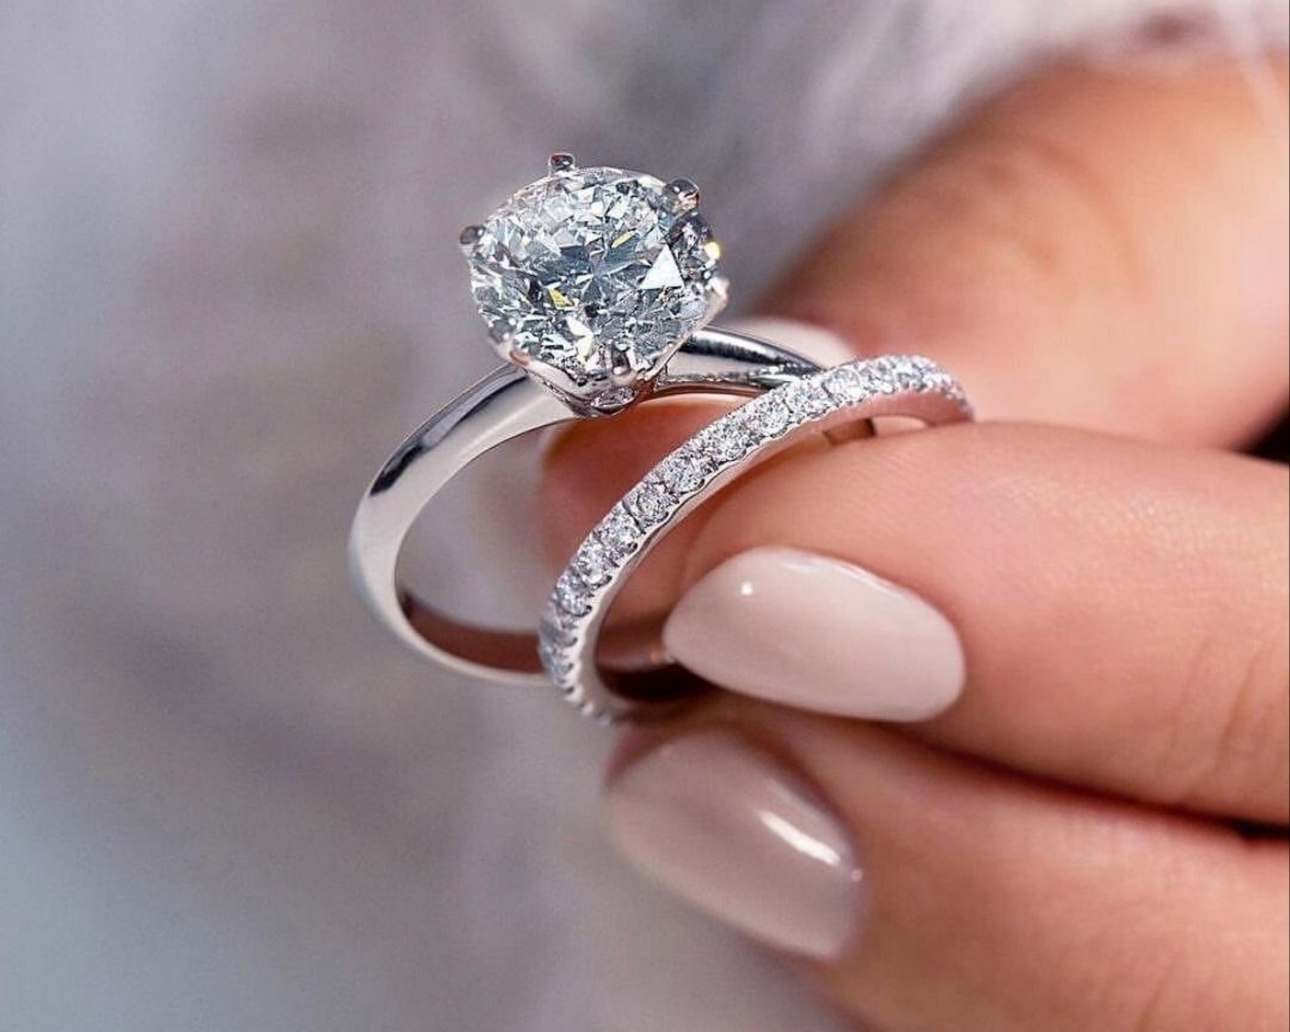 engagement and wedding band with diamond in brides hand